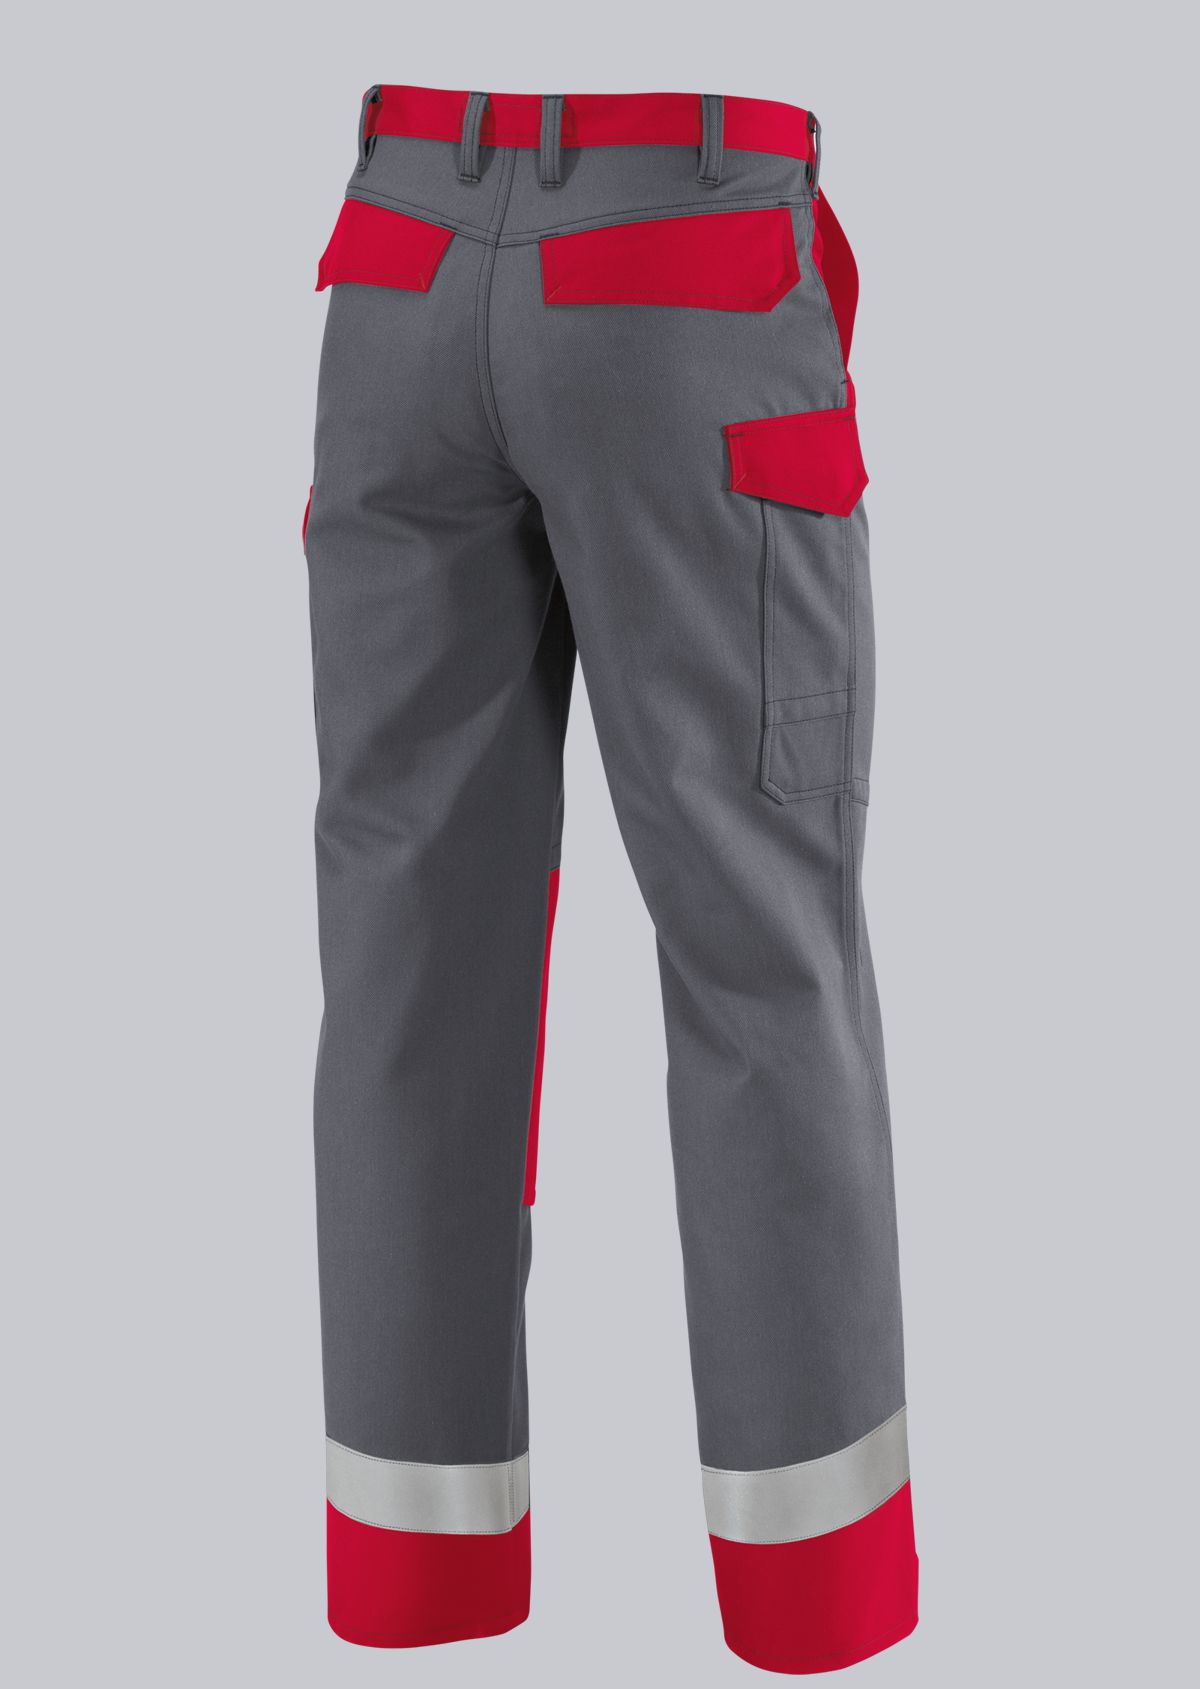 BP® Multi-standard APC2 trousers with reflective strips